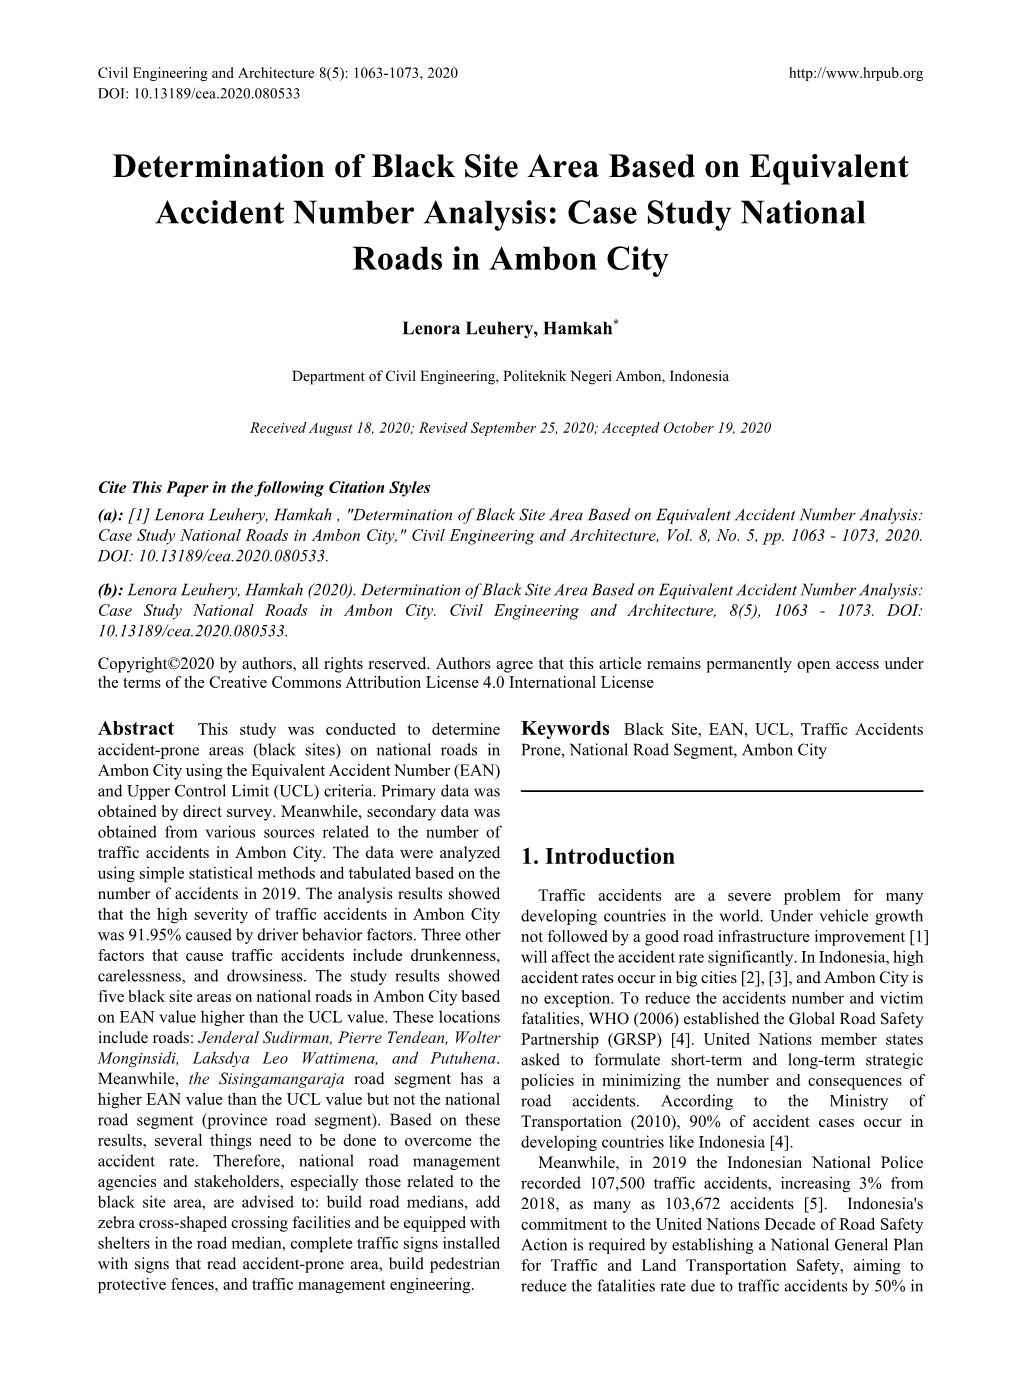 Determination of Black Site Area Based on Equivalent Accident Number Analysis: Case Study National Roads in Ambon City